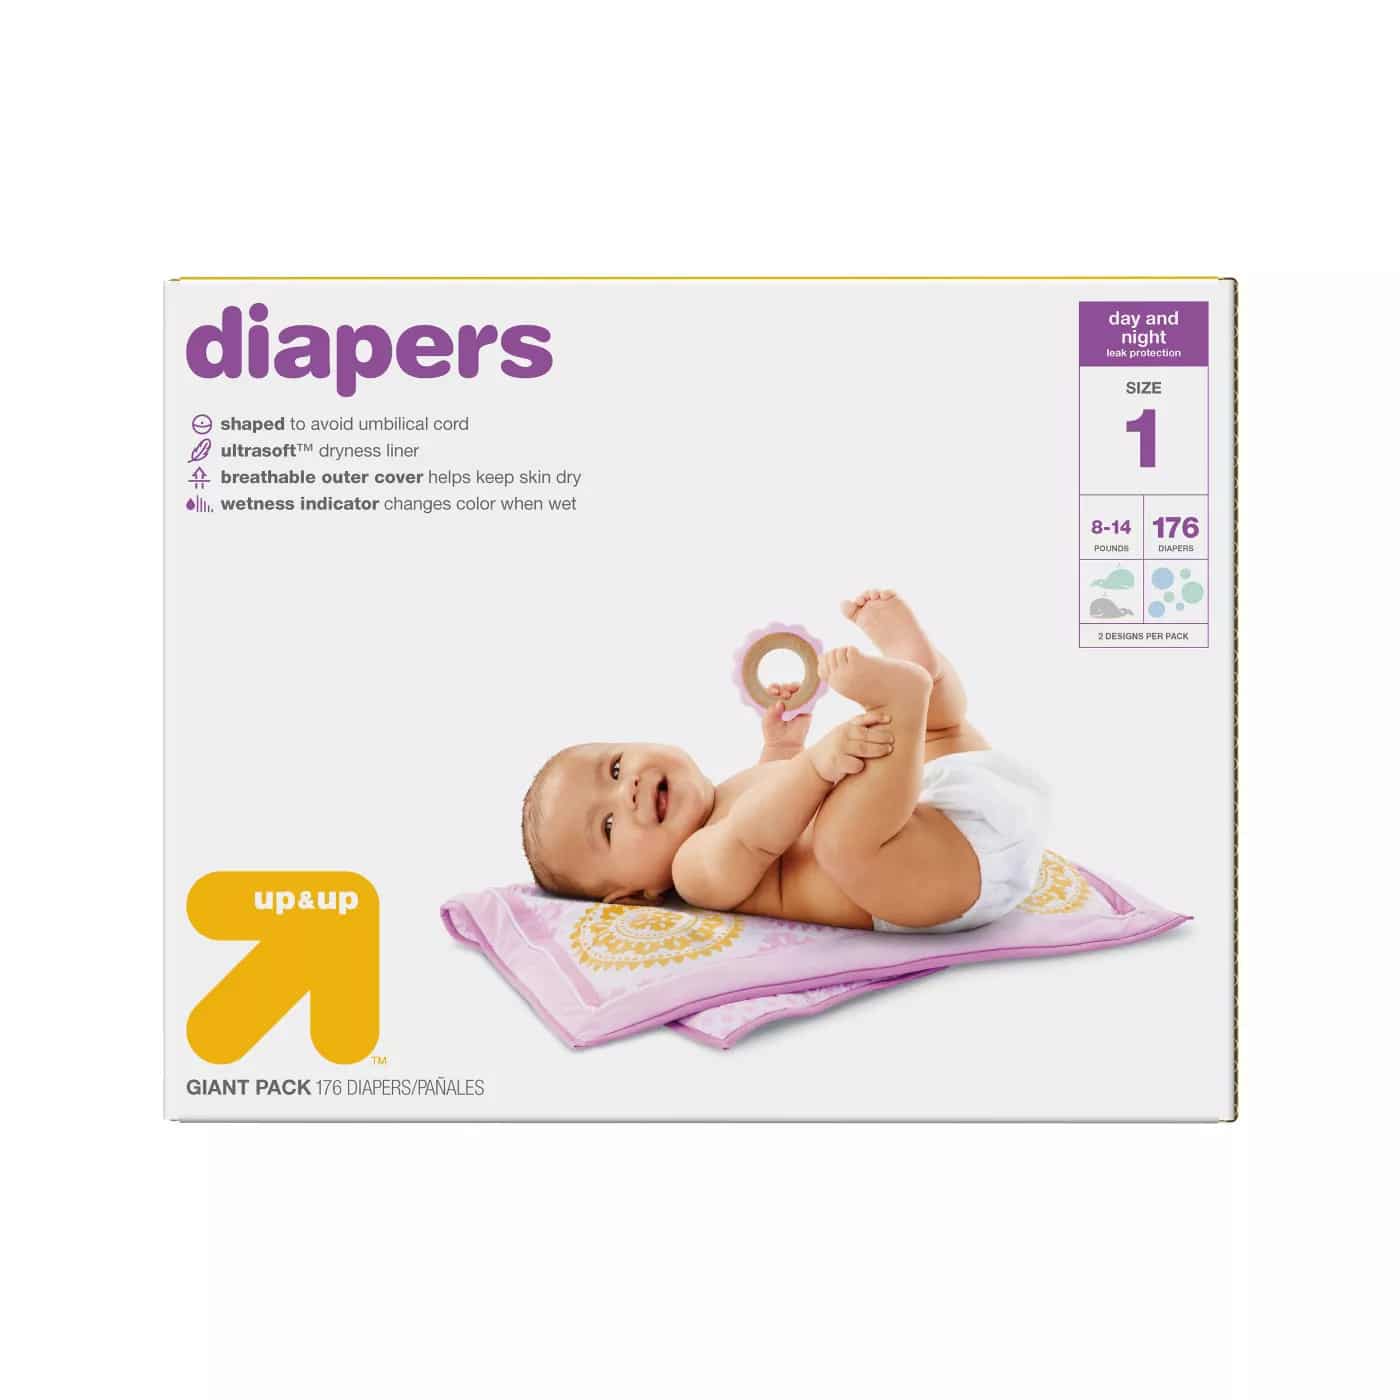 Diapers Giant Pack